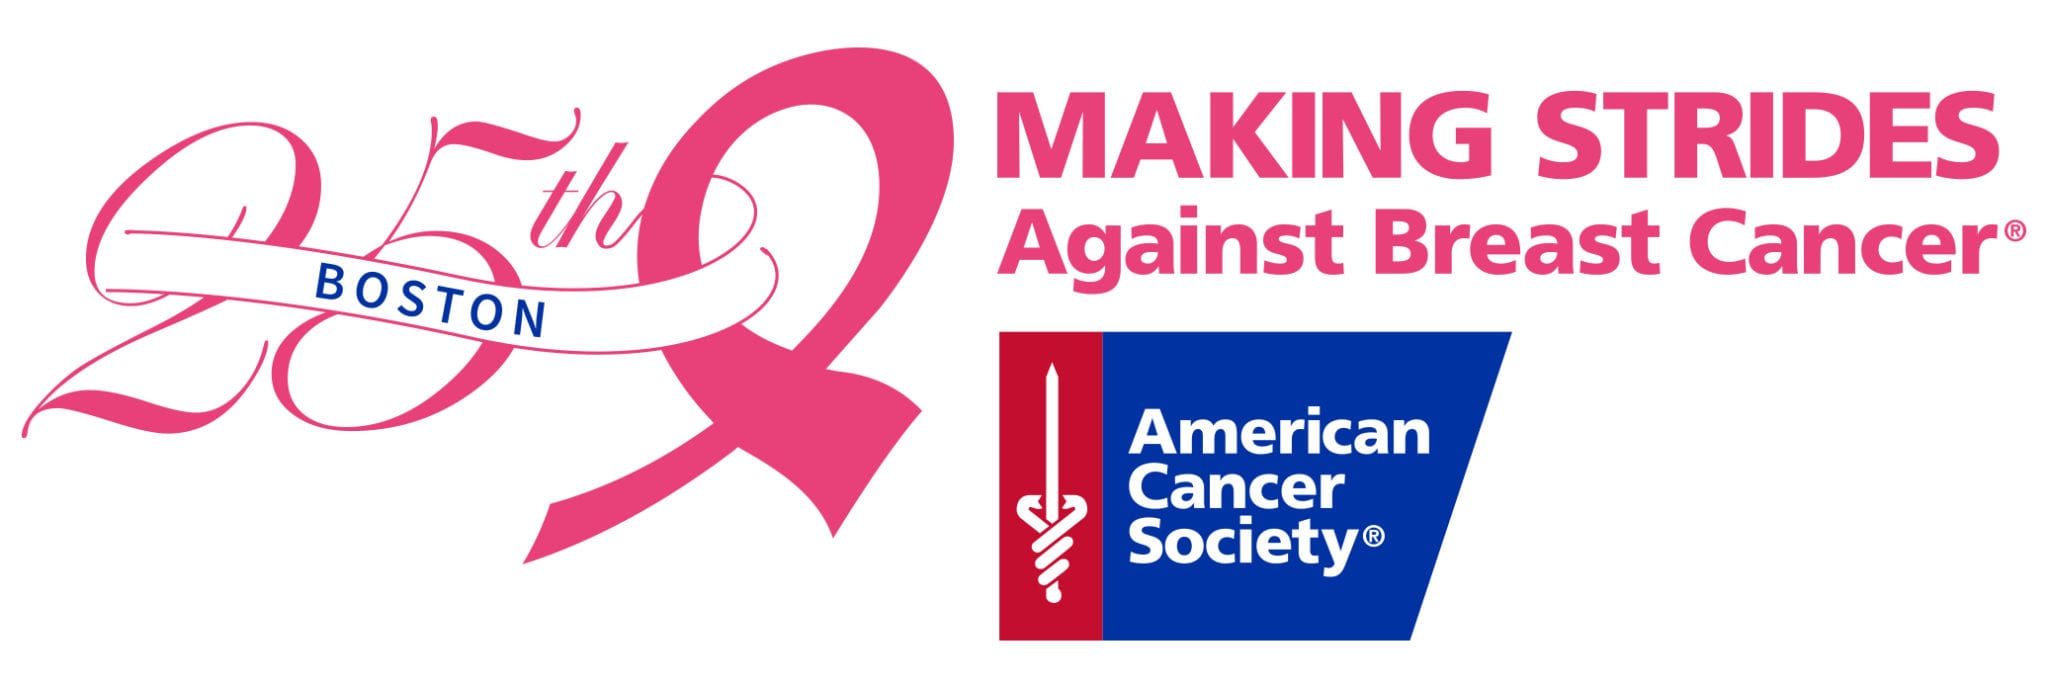 Making Strides Against Breast Cancer of Boston Boston Charity